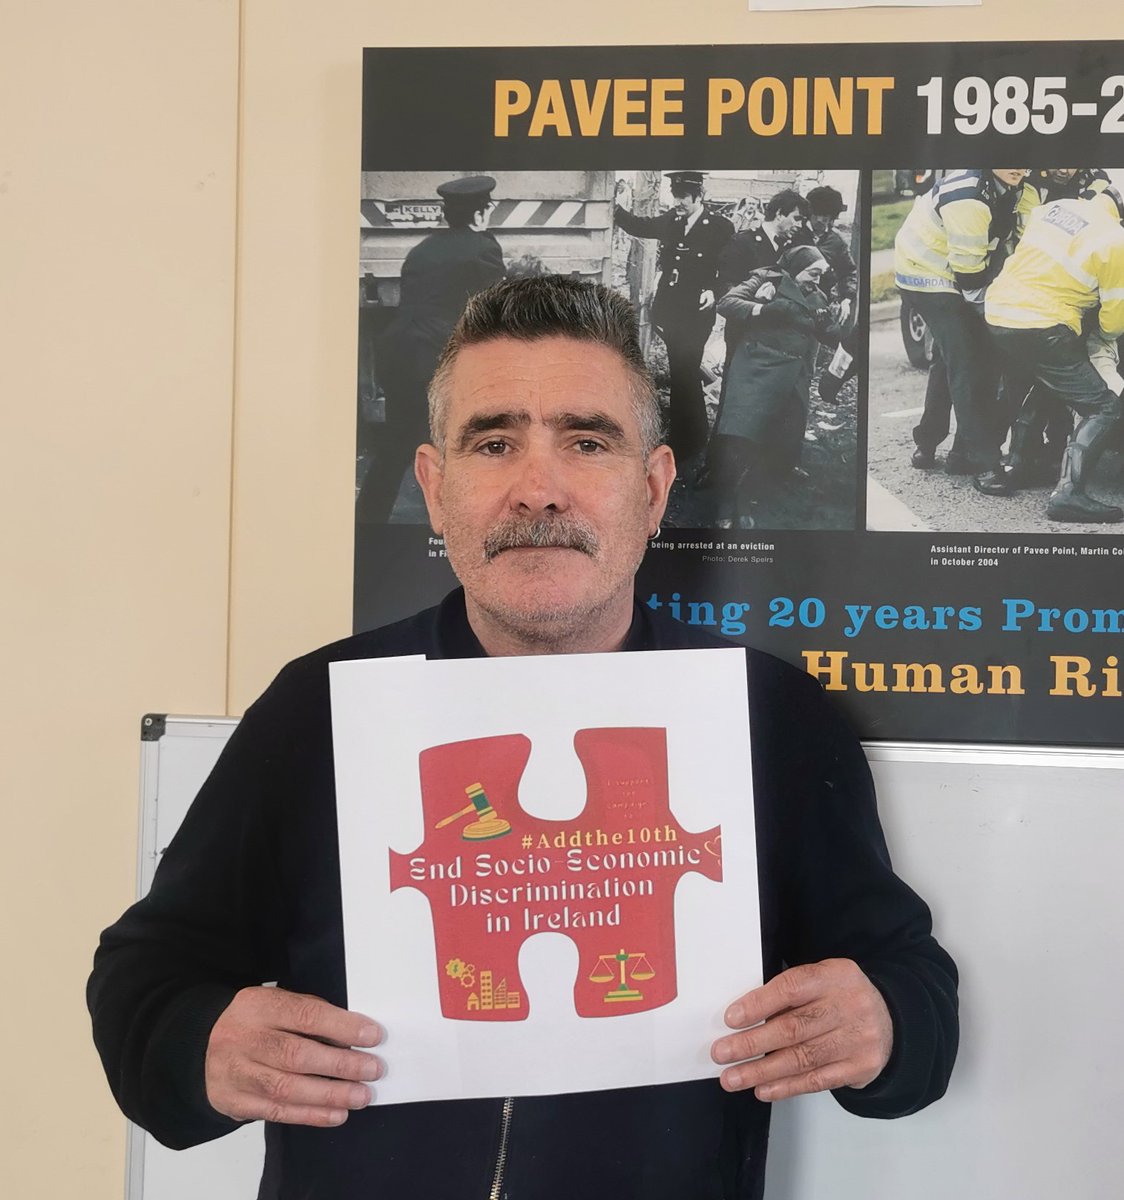 Socio Economic Discrimination needs to be challenged to achieve #EqualityforAll says @PaveePoint Co Director Martin Collins #Addthe10th
 

Join the campaign